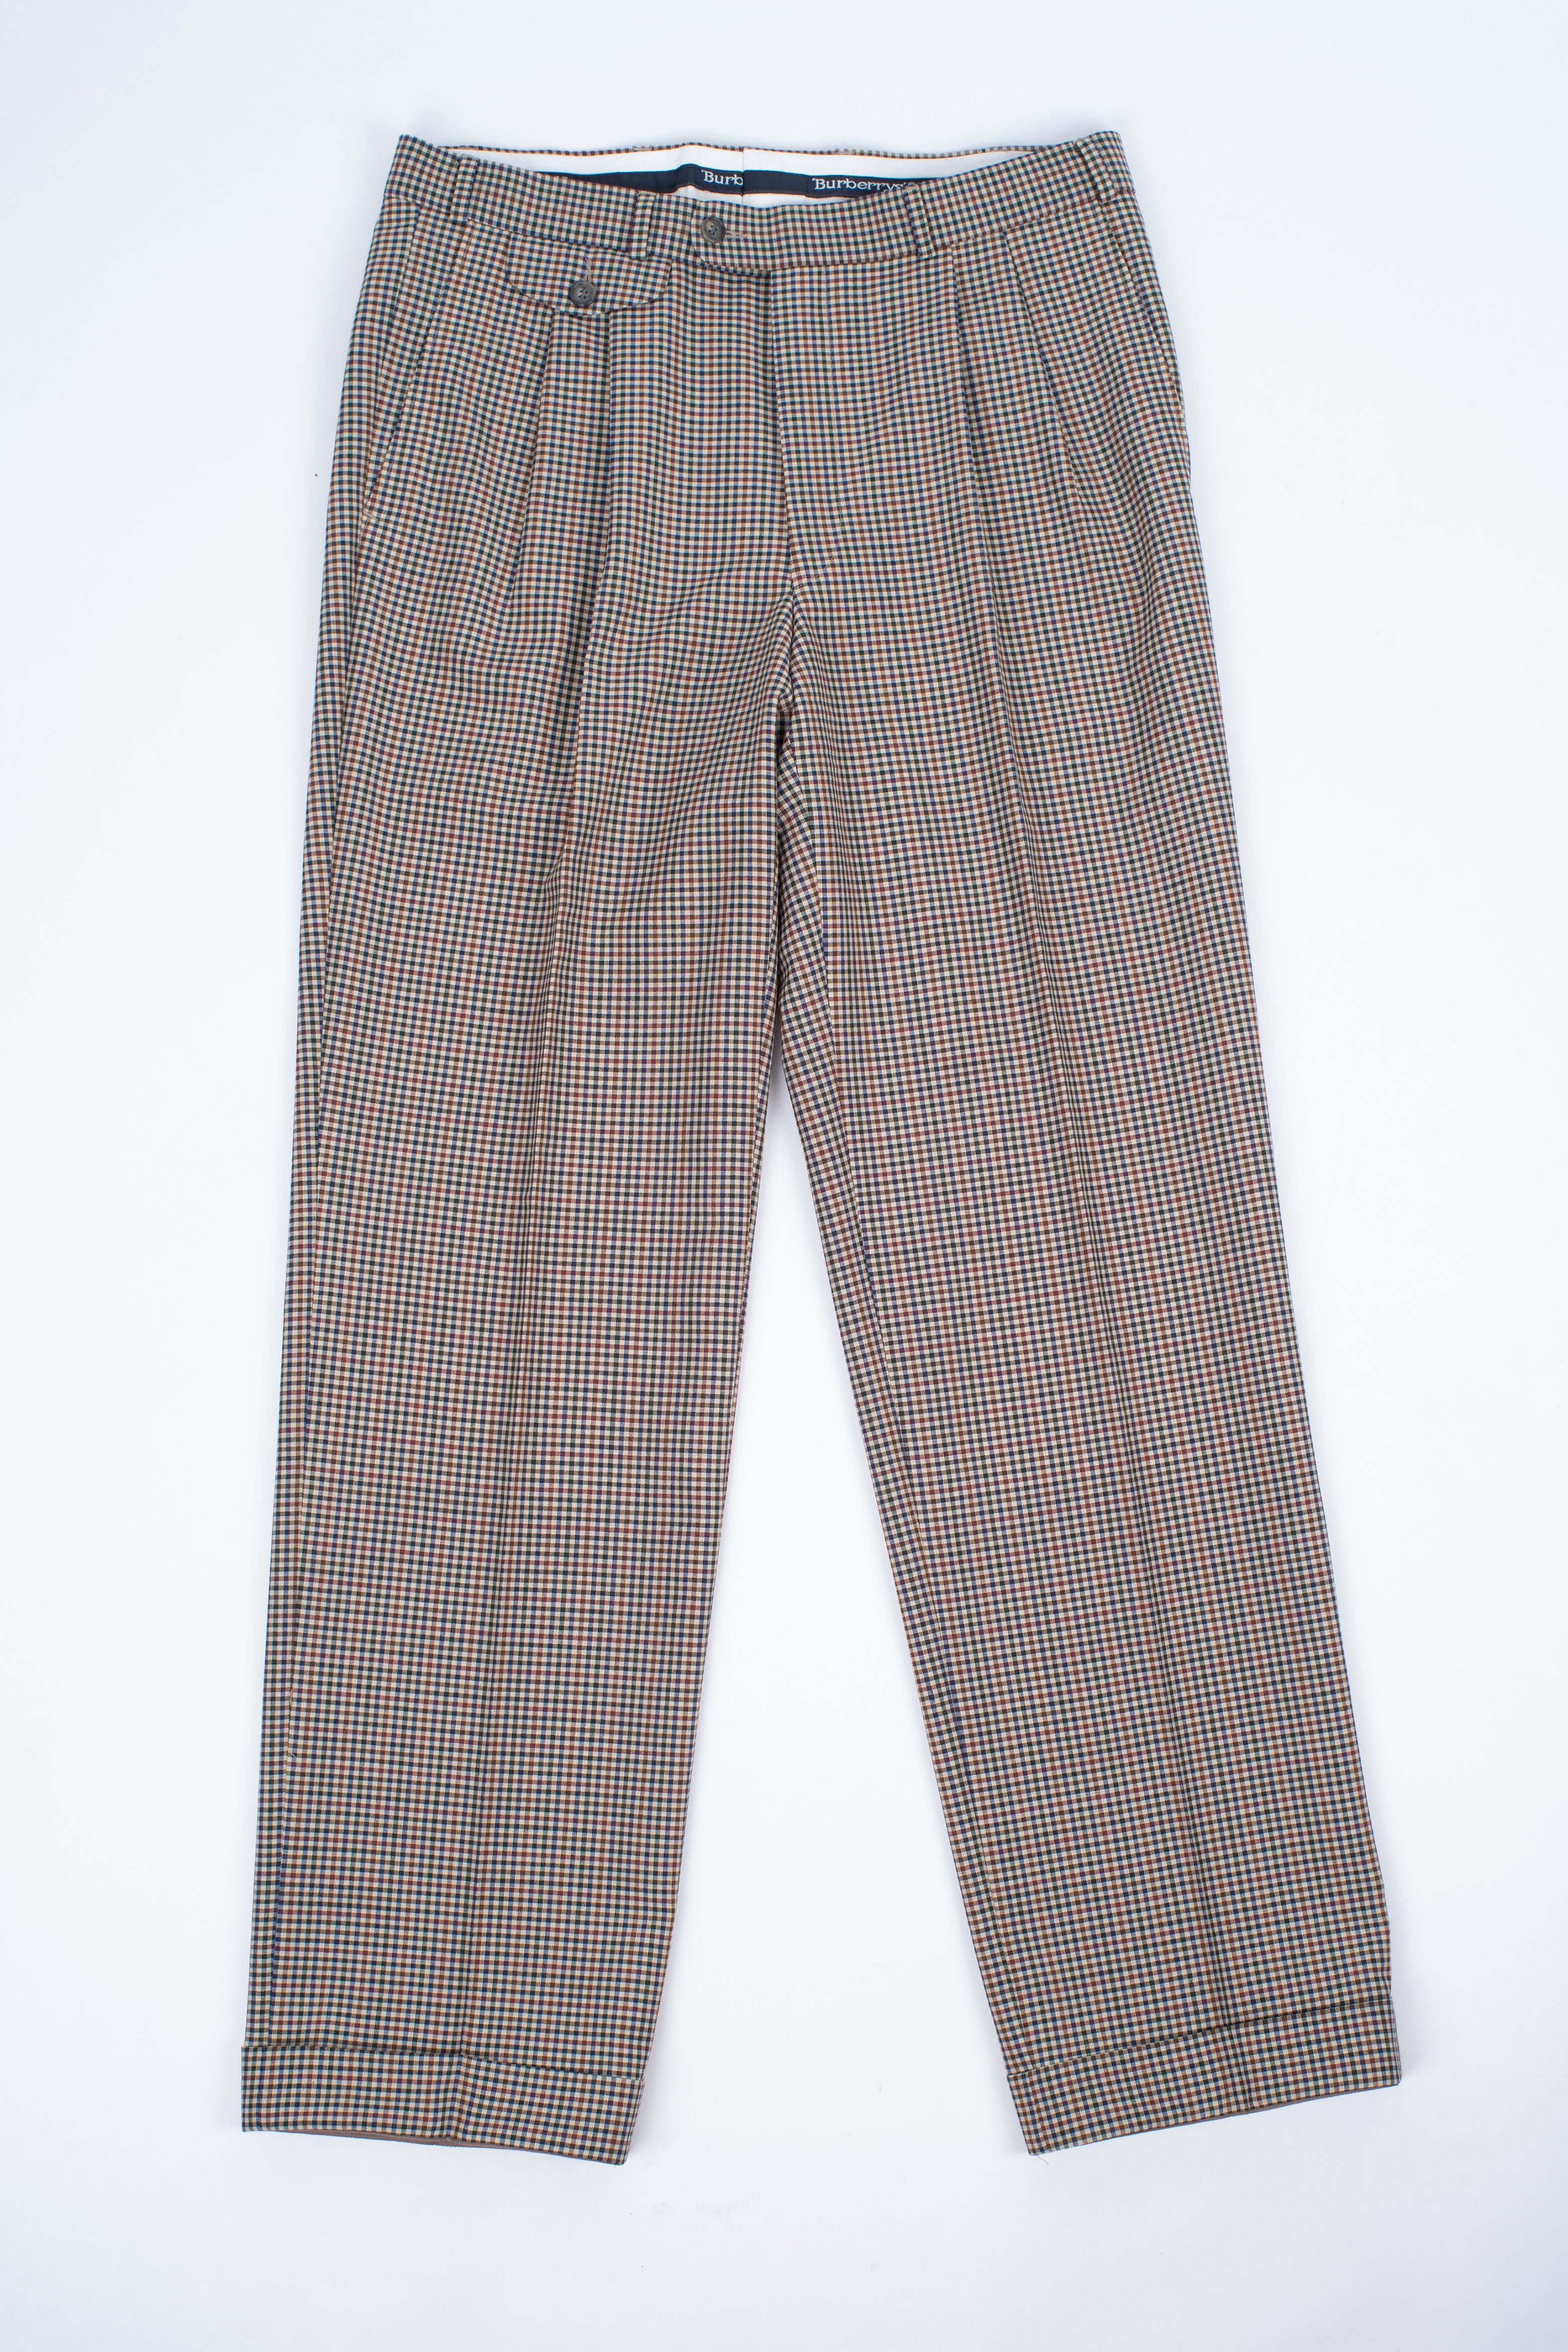 Burberry Checkered Wool Double Pleat Men's Trousers, EU 50